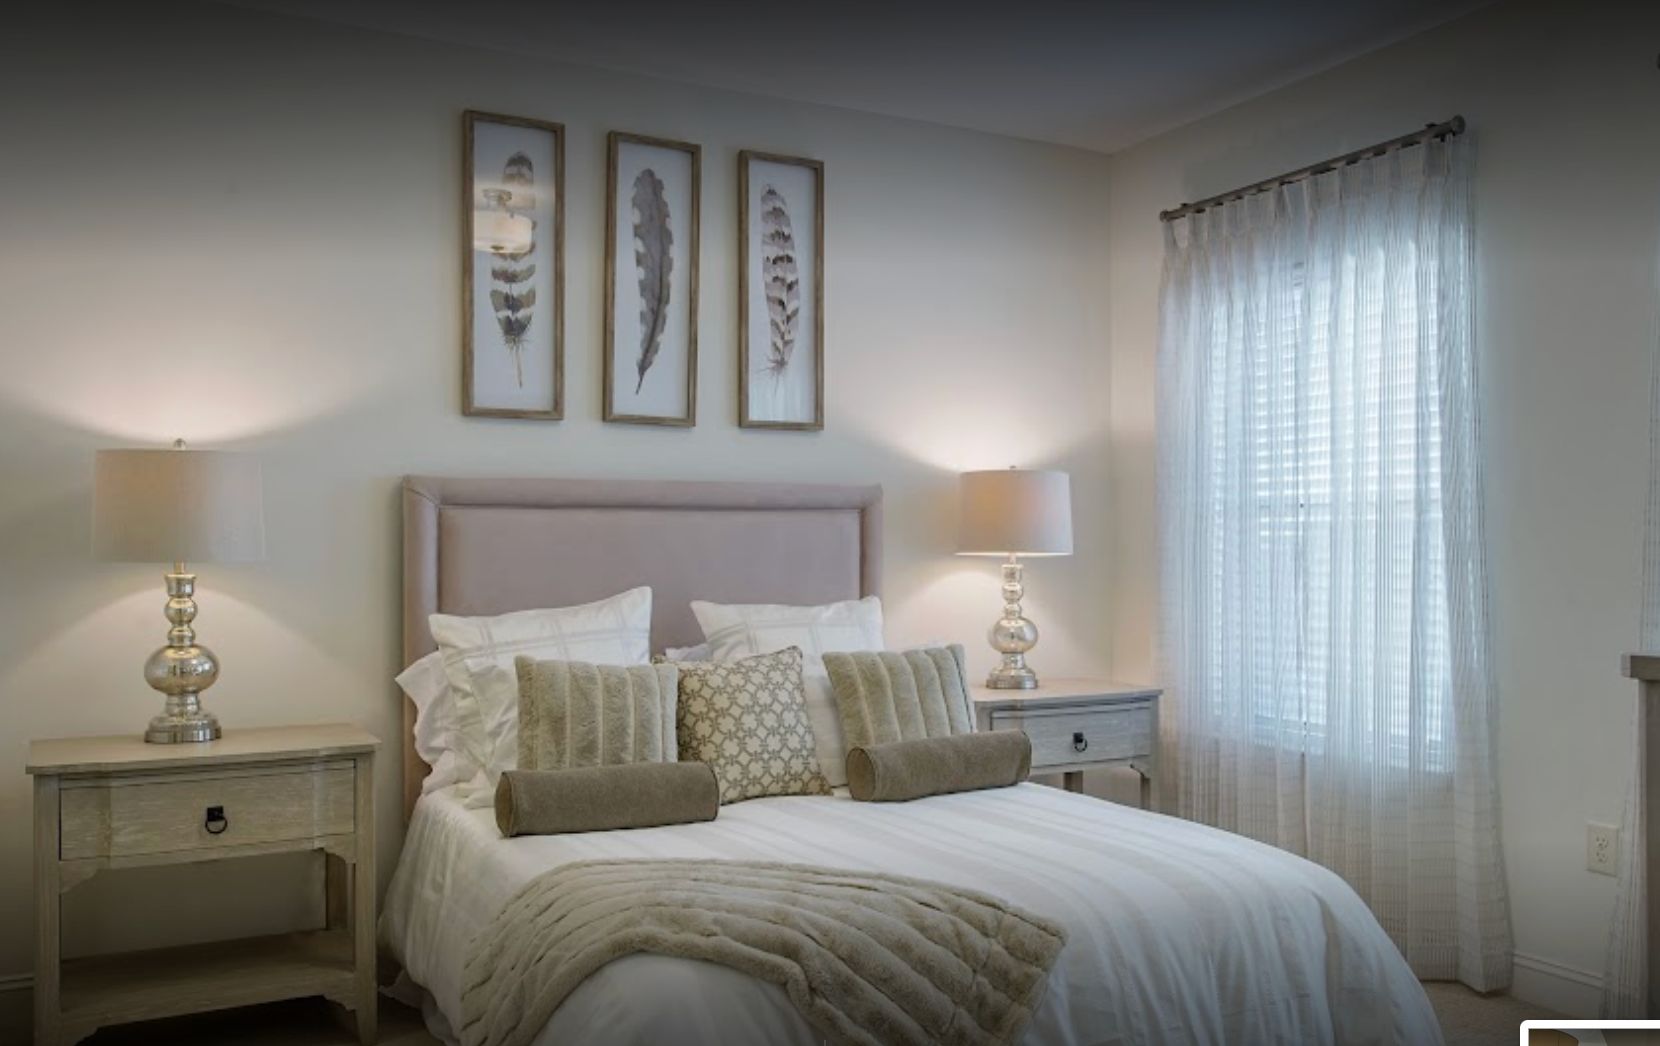 Interior design of a bedroom at Somerby Franklin senior living community with art and decor.